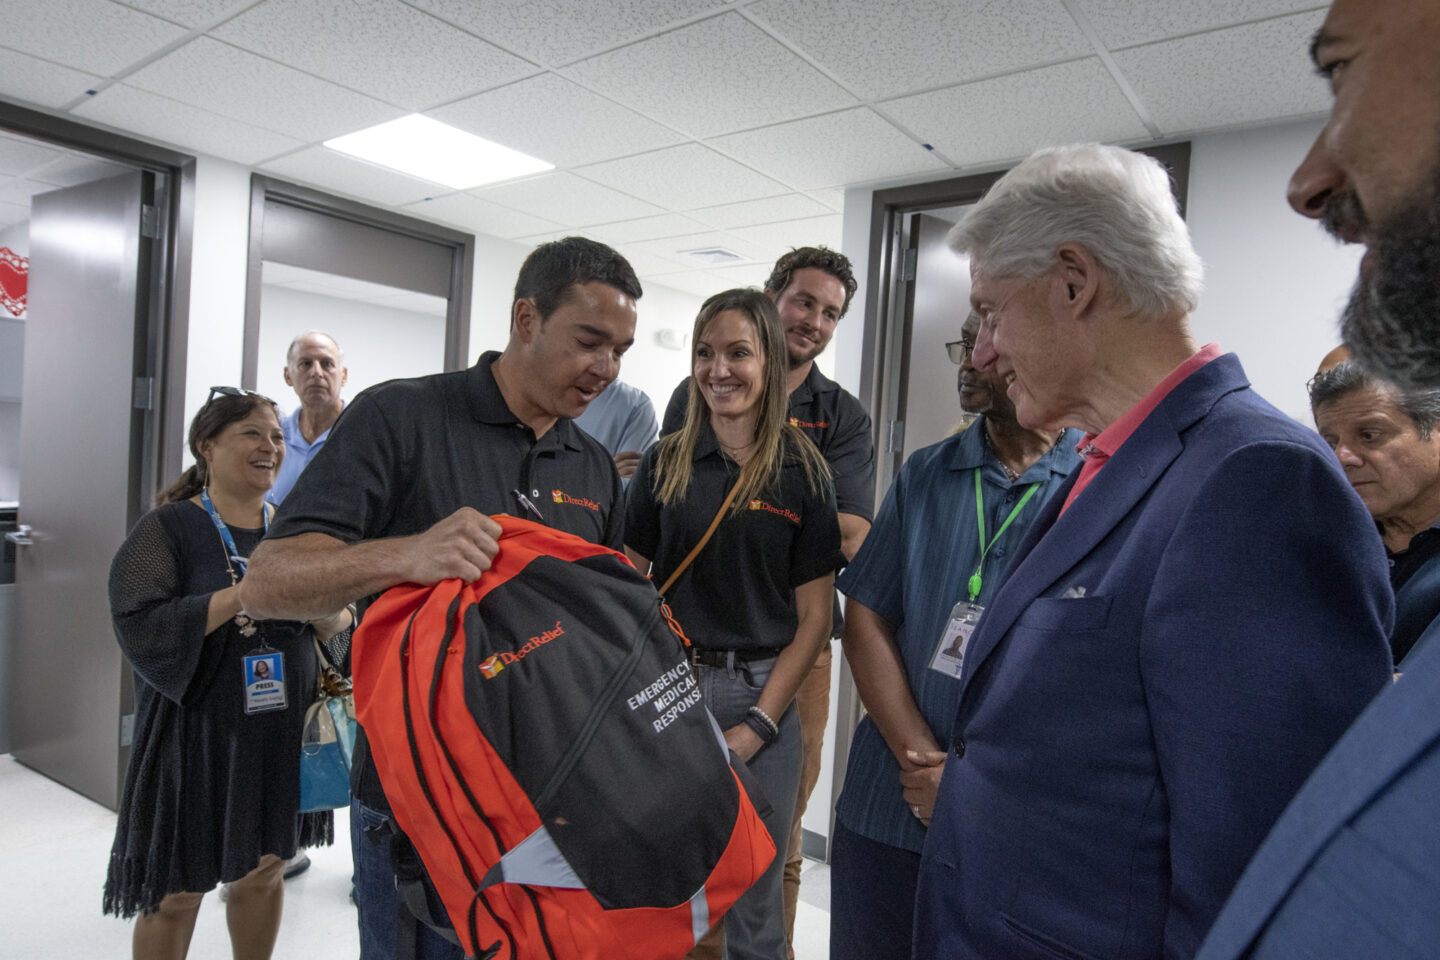 President Clinton speaks with an individual holding a backpack that says "emergency medical response"